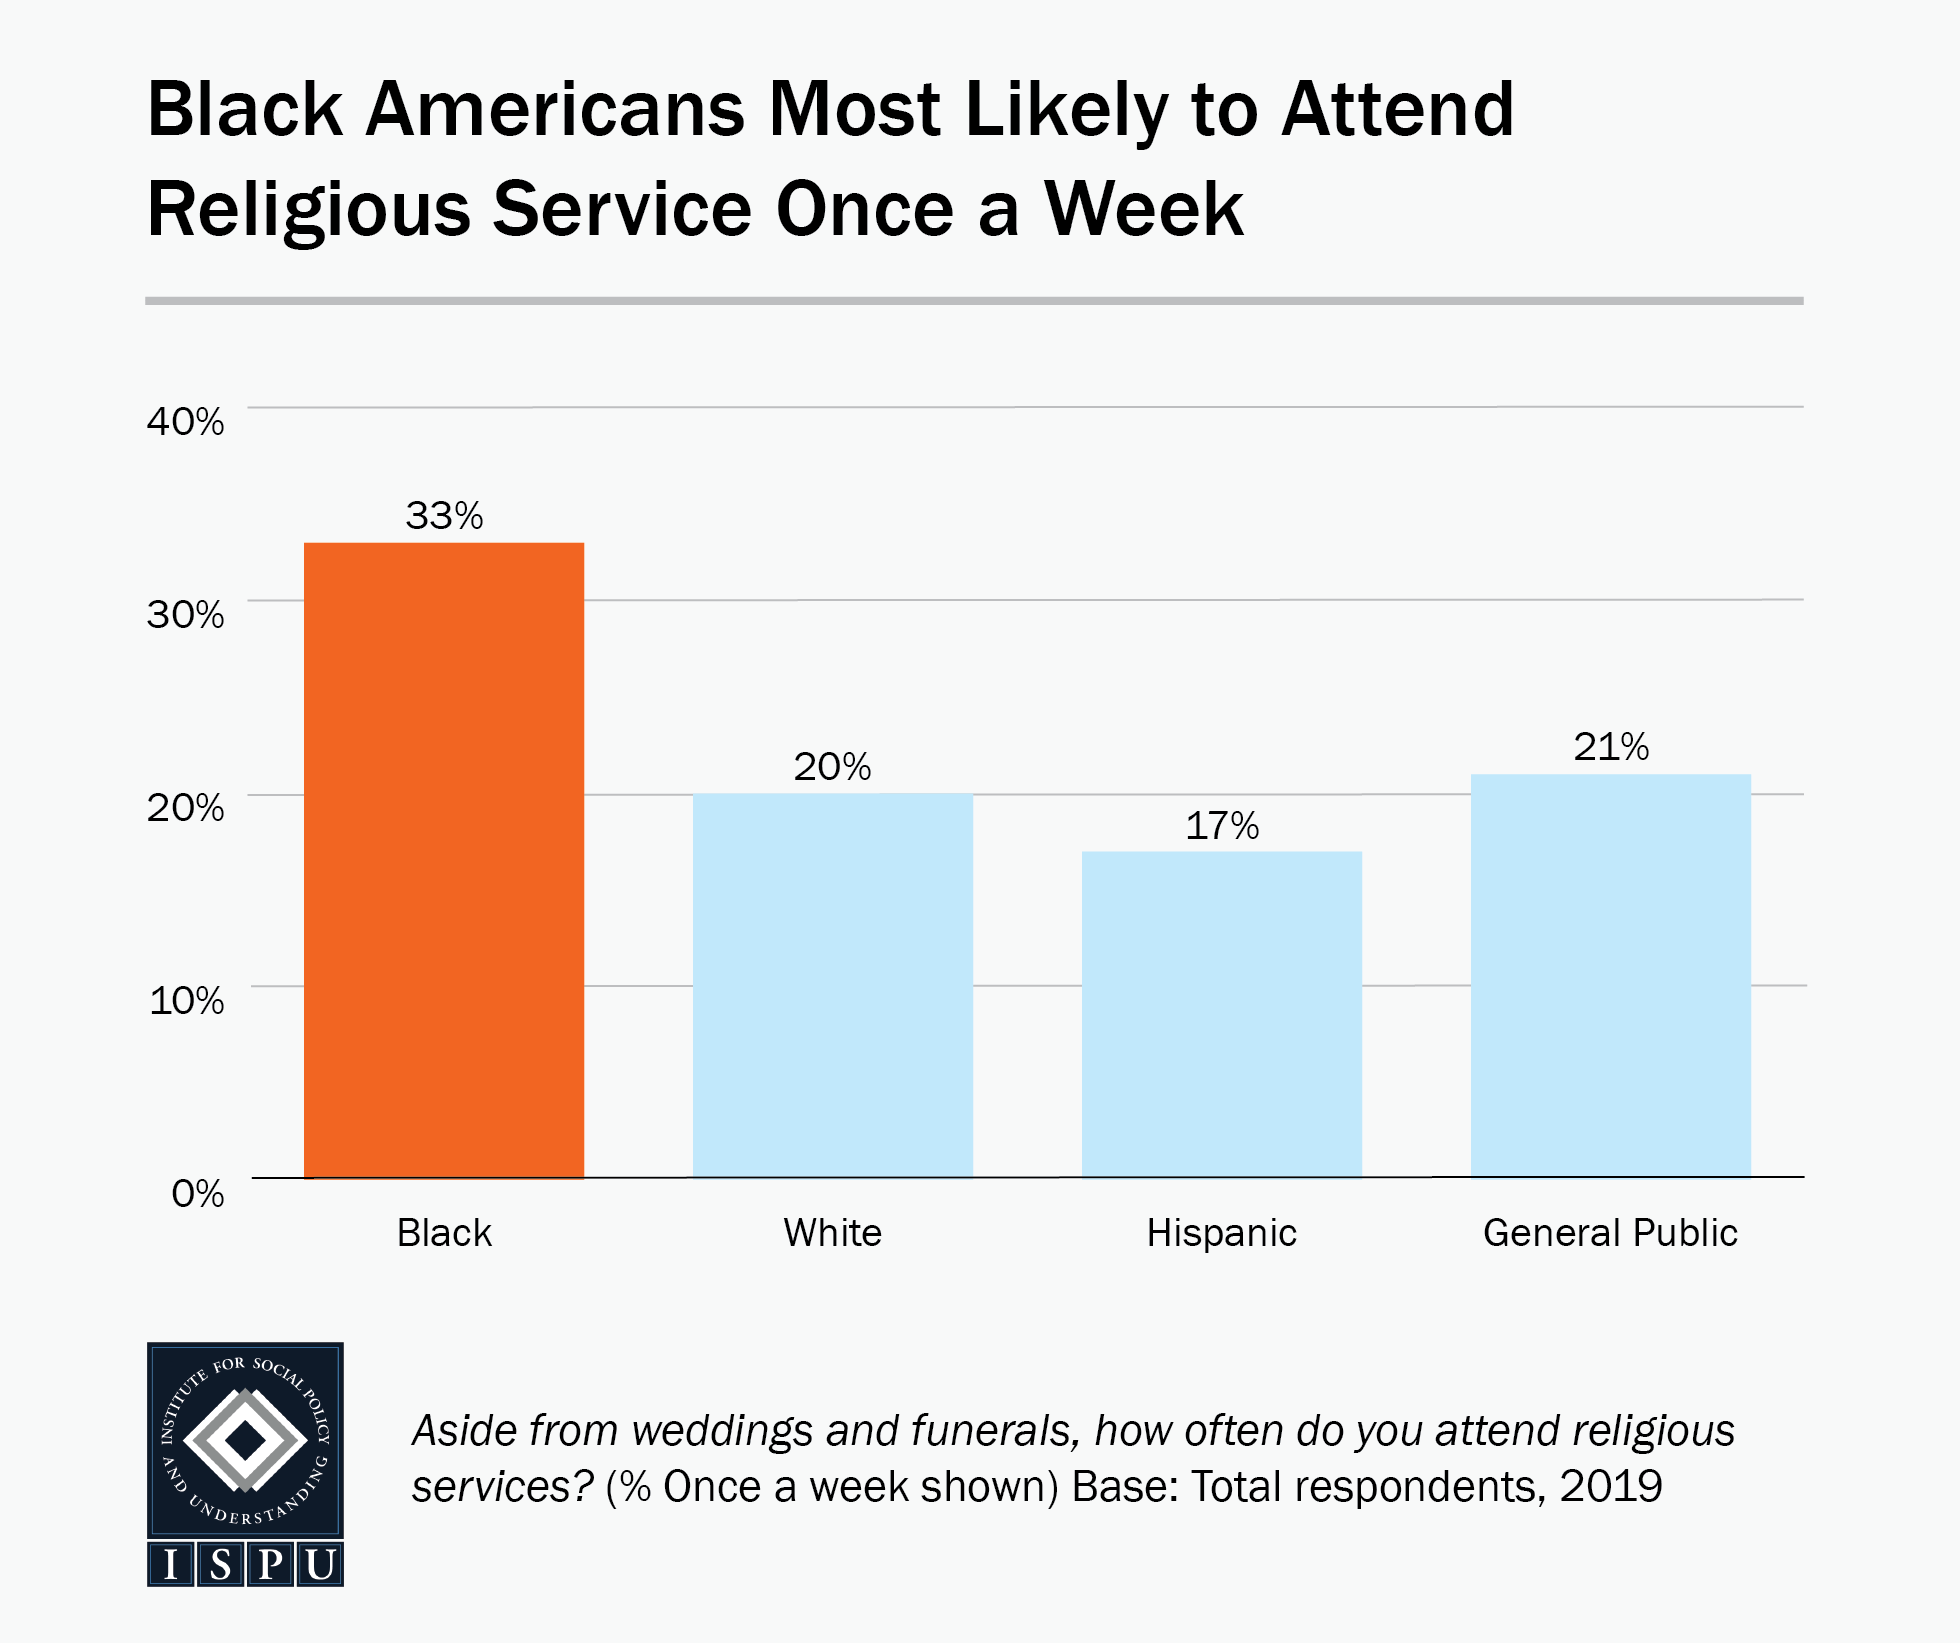 Bar graph showing that Black Americans (33%) are most likely to attend religious service once a week